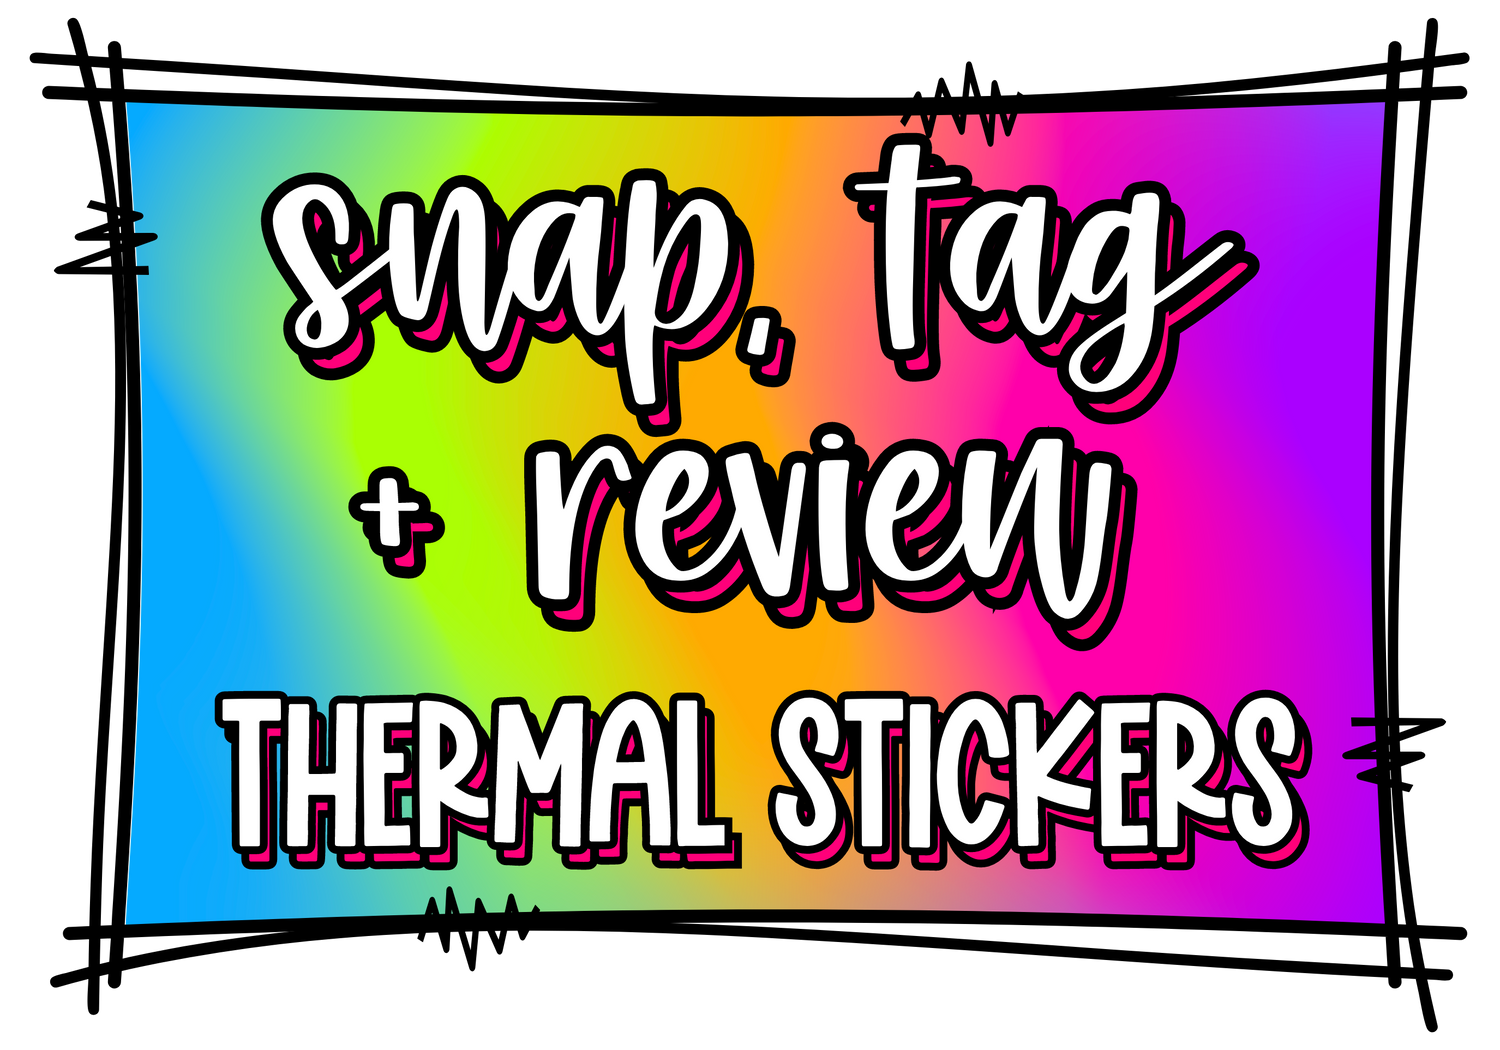 Snap, Tag, Review: Small Business Thermal Stickers